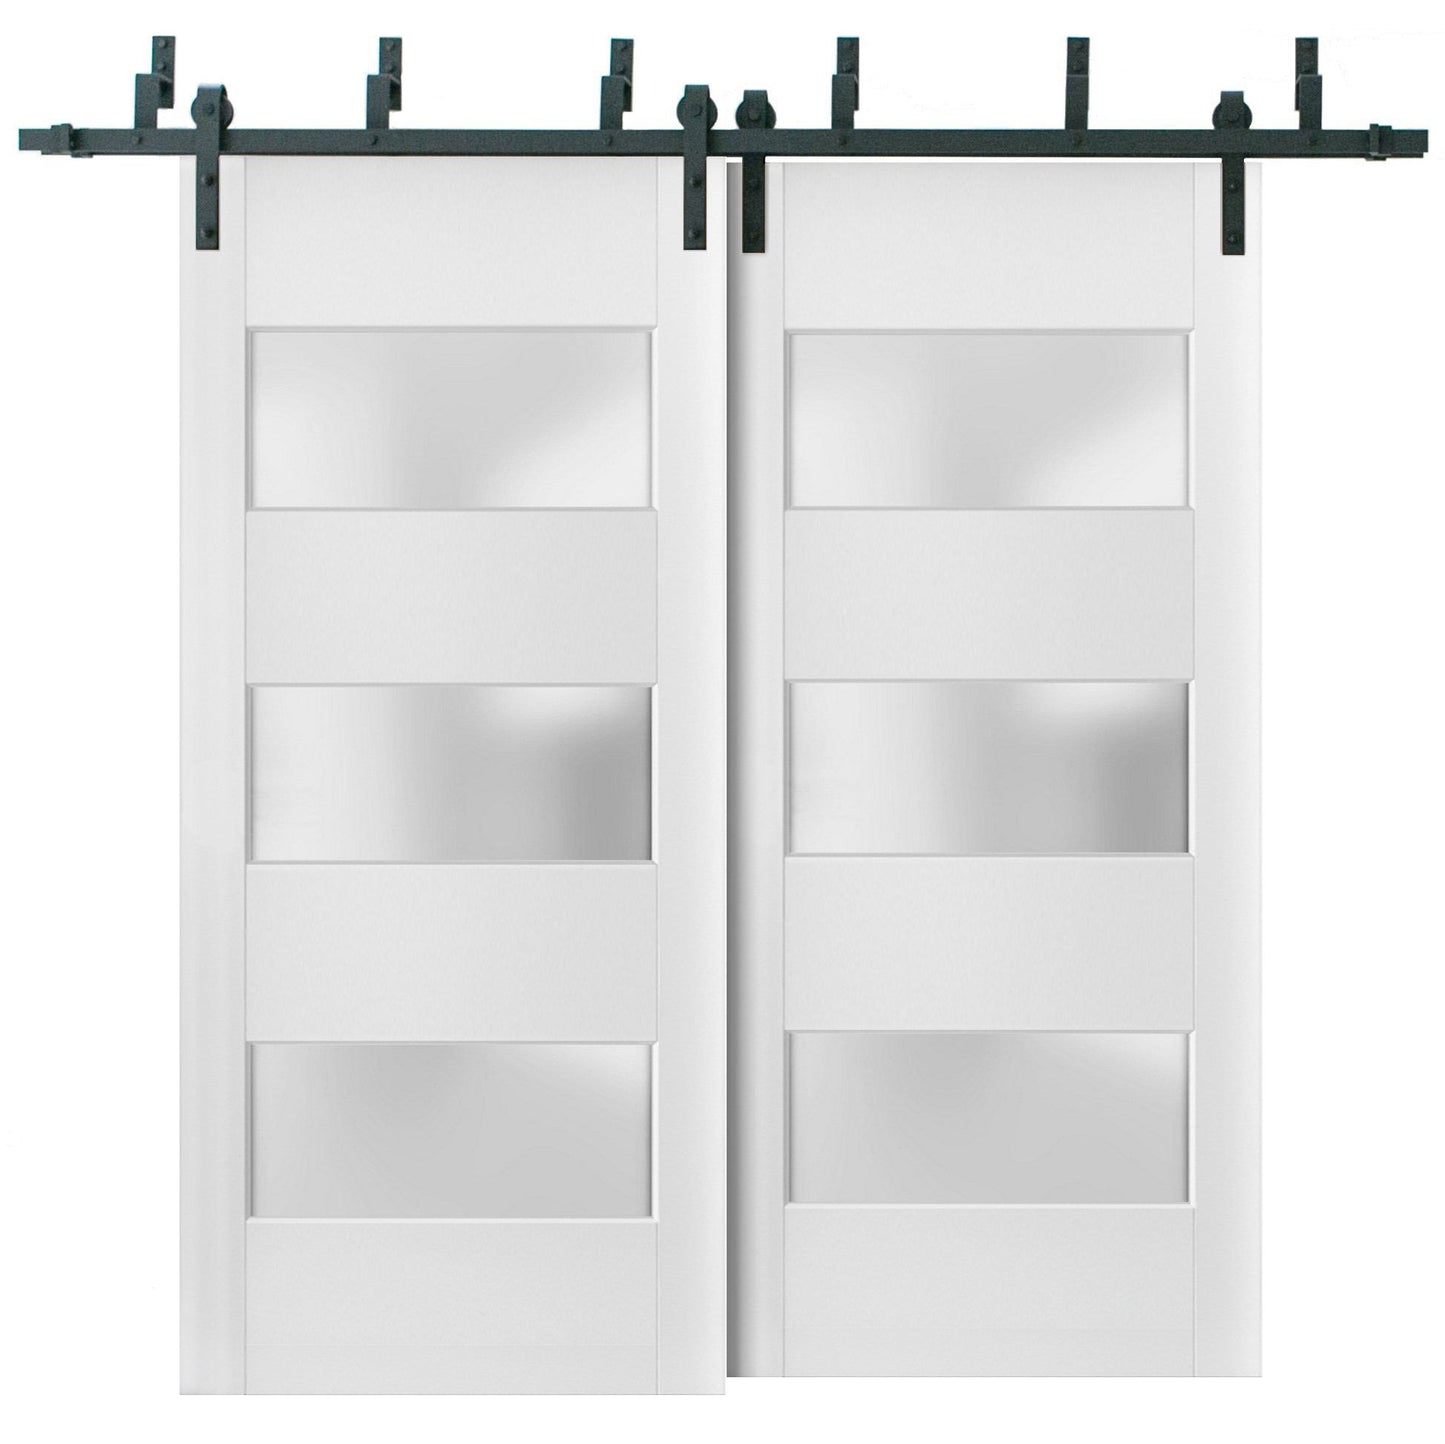 Lucia 4070 White Silk Double Barn Door with 3 Lites Frosted Glass | Black Bypass Rails